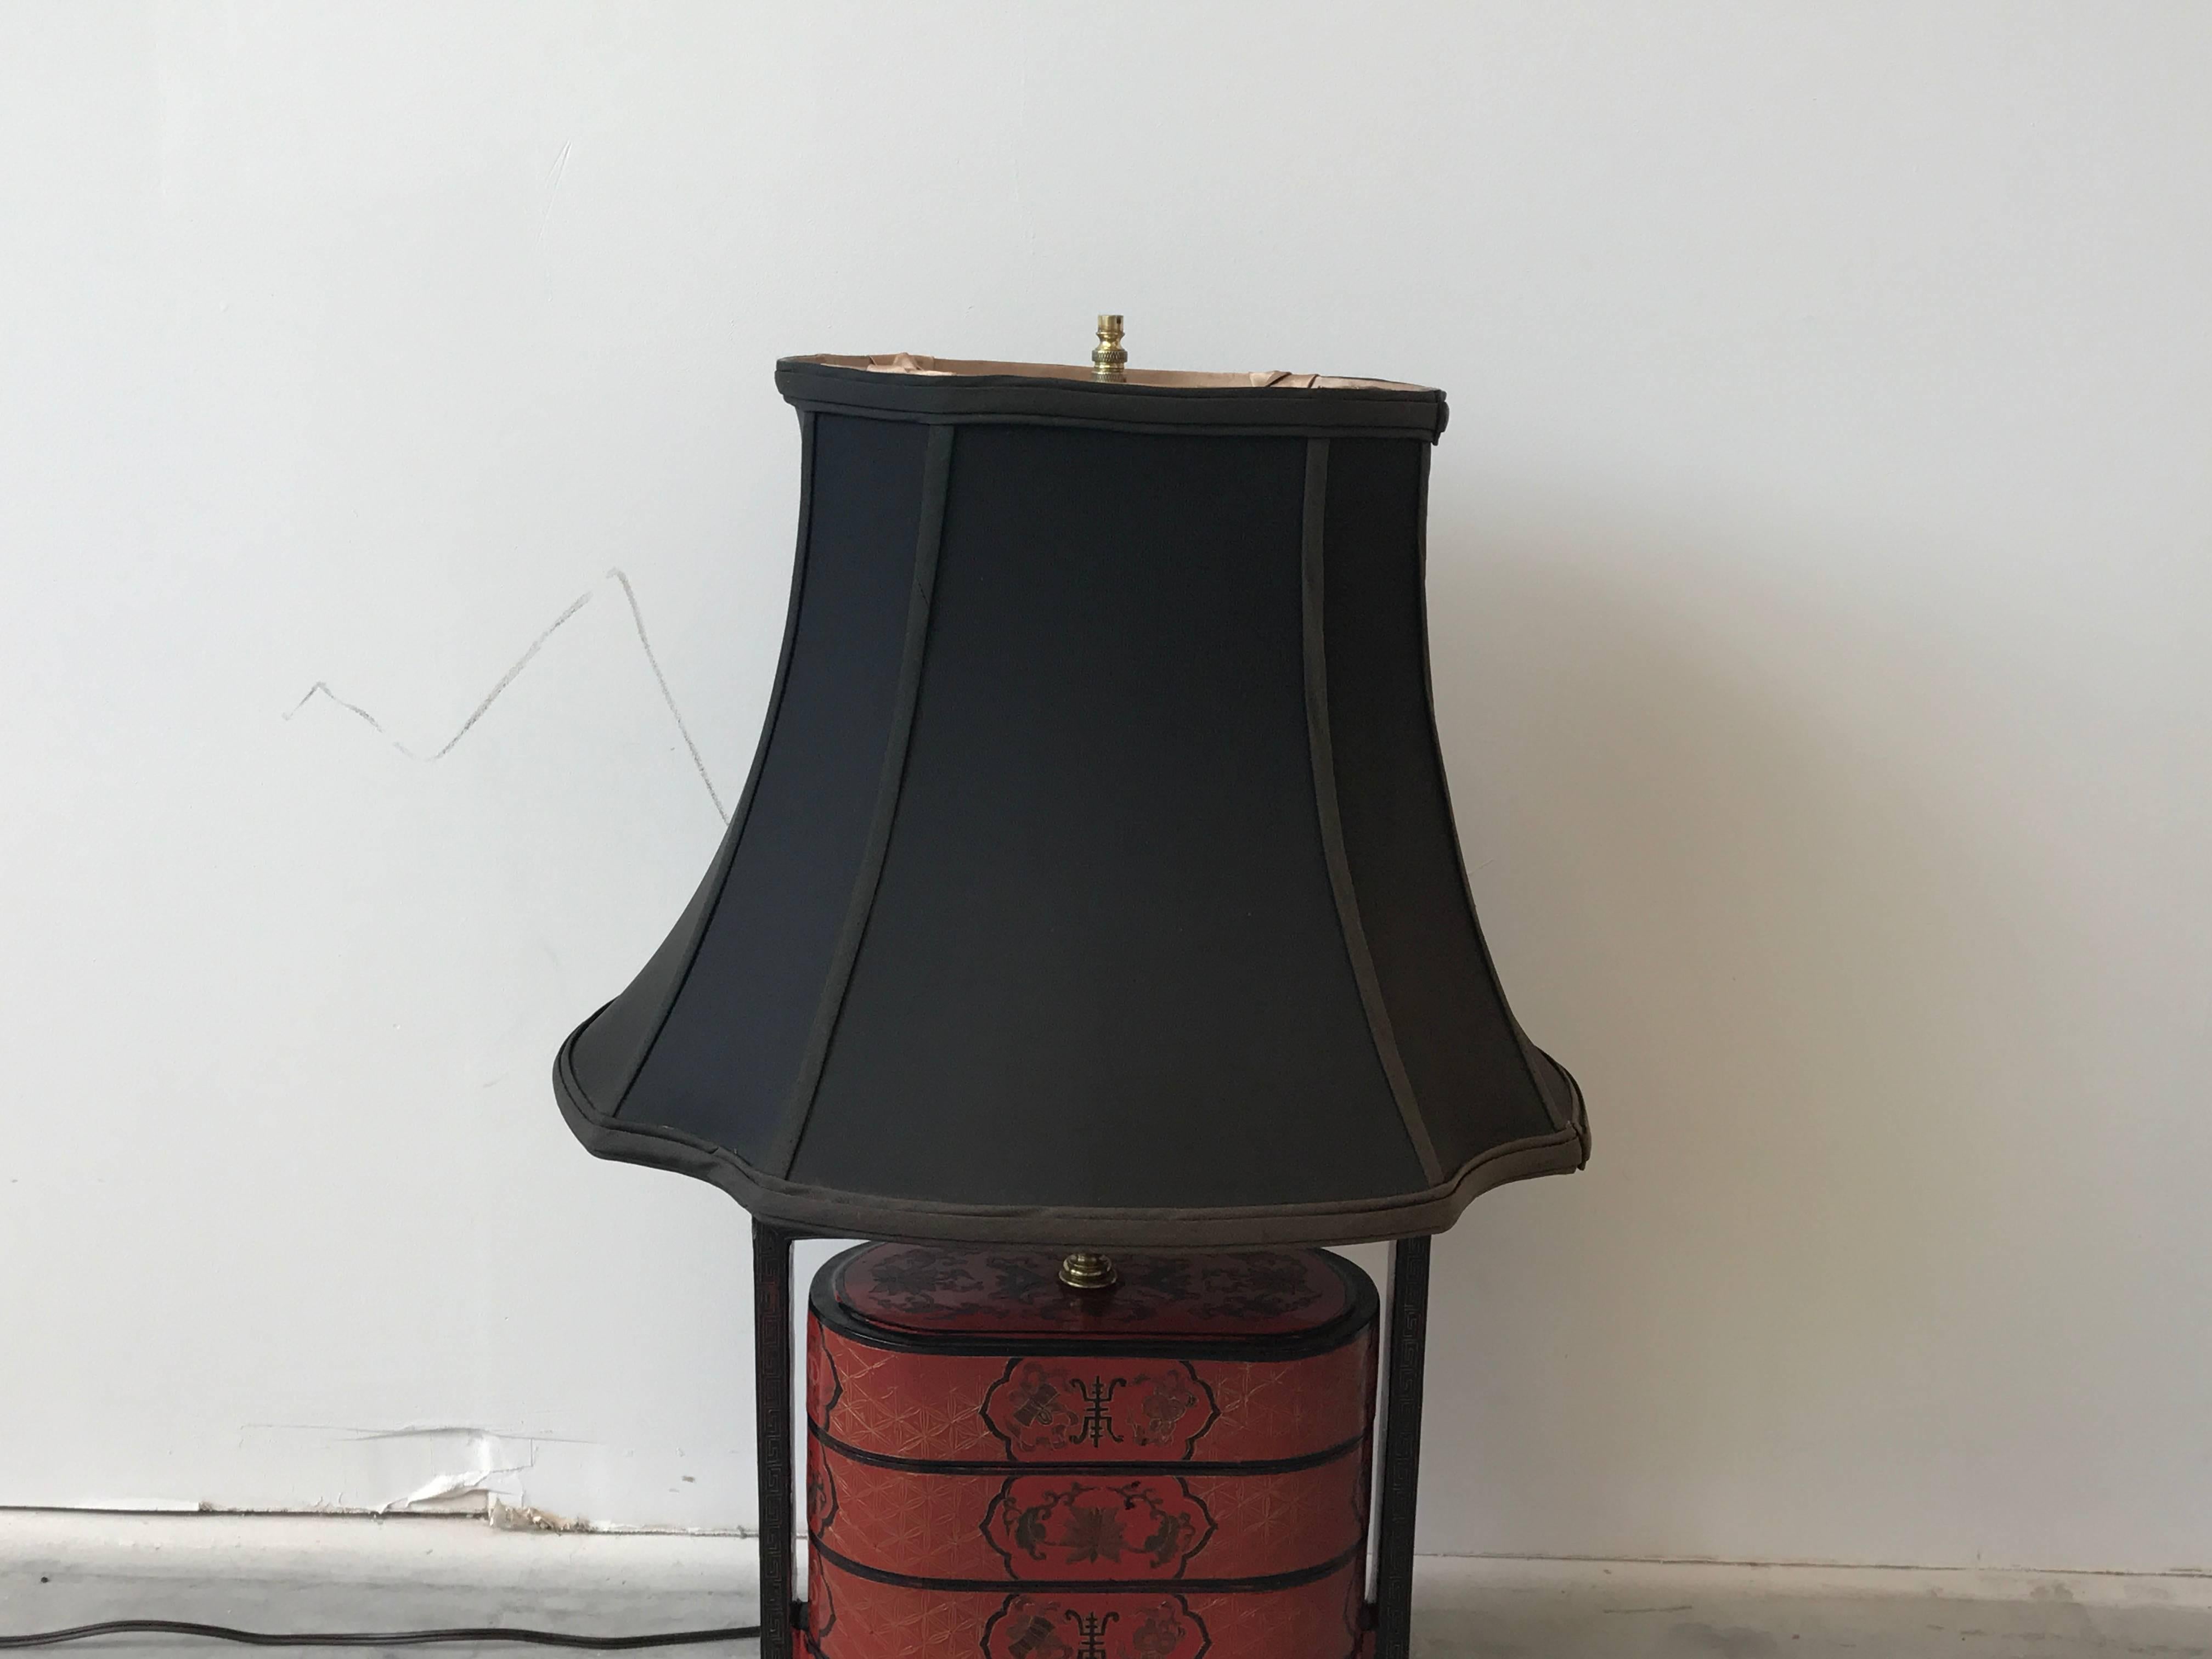 Offered is a fabulous, 1940s Chinese red and black lacquered lamp. The piece is made of converted stacking decorative boxes. Includes shade. Shade is in good, vintage condition.

Measures: 5